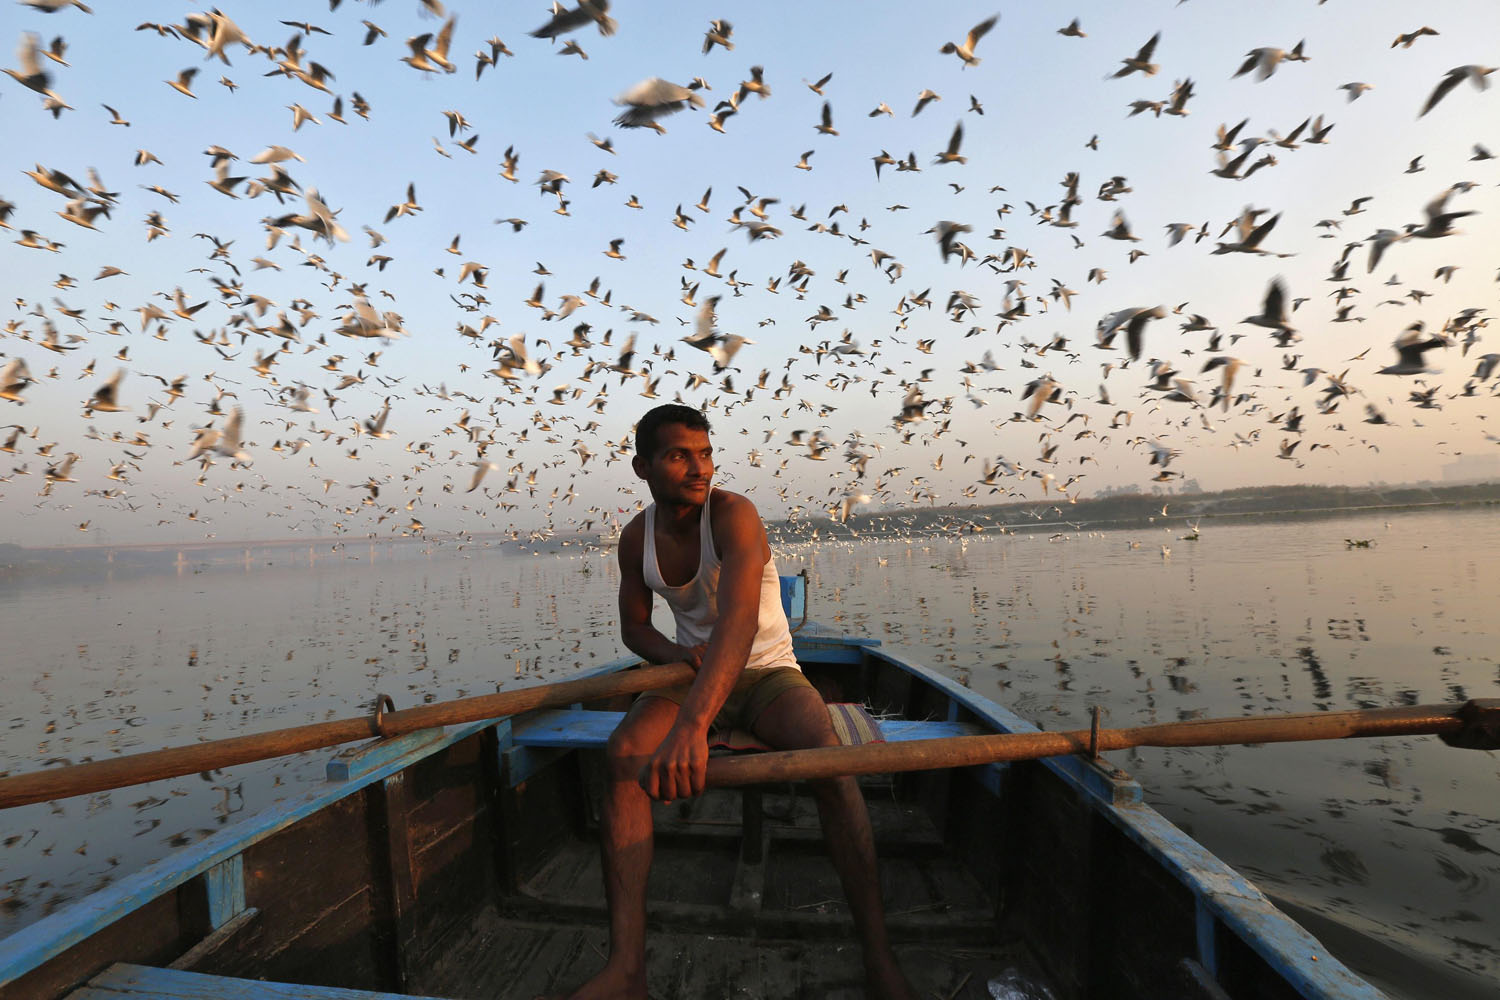 Nov. 19, 2013. Migratory birds fly above a man rowing a boat in the waters of river Yamuna during early morning in old Delhi, India.